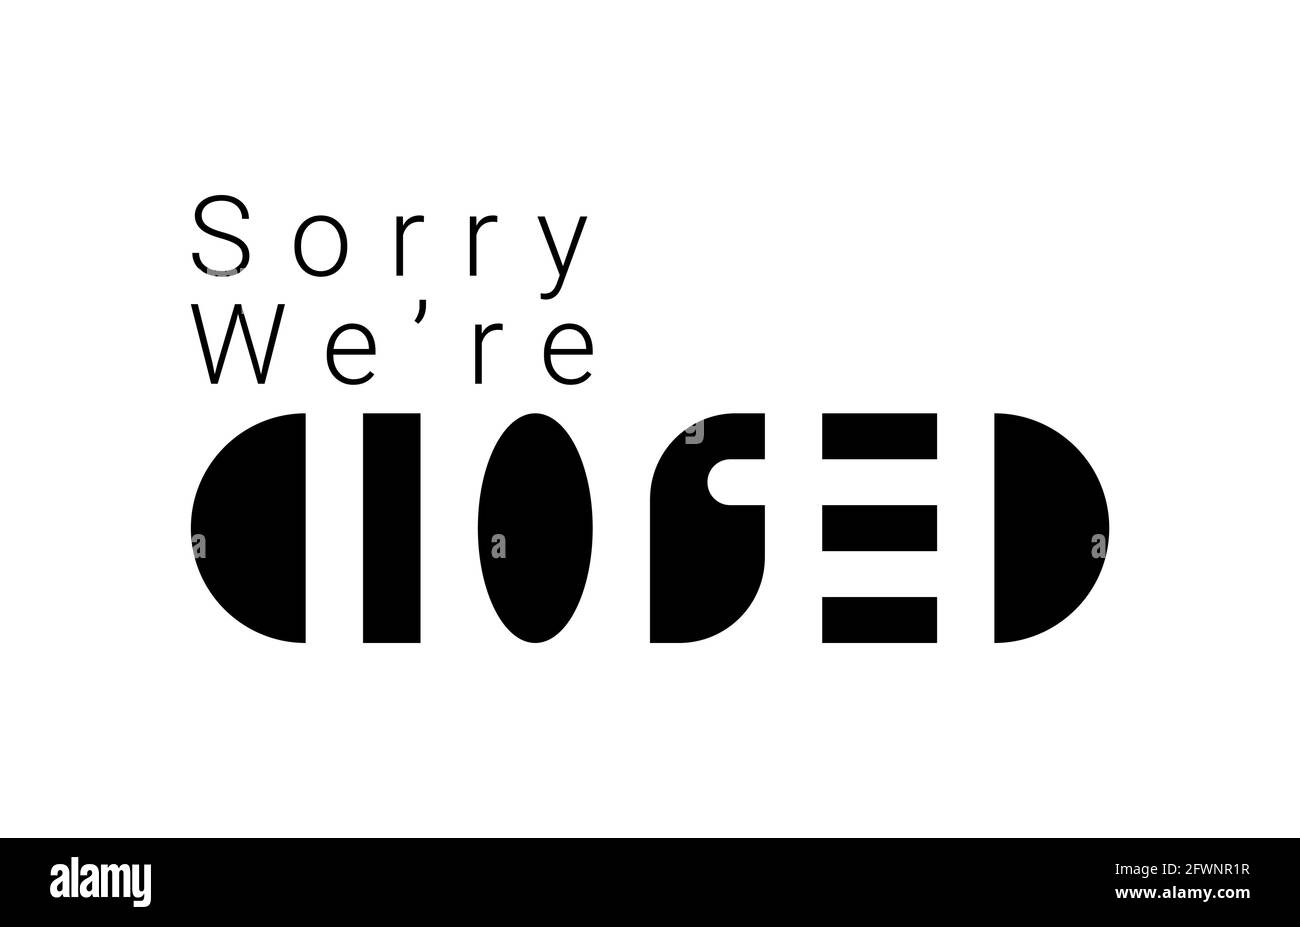 Sorry we are closed. Vector composition in minimalistic font style Stock Vector